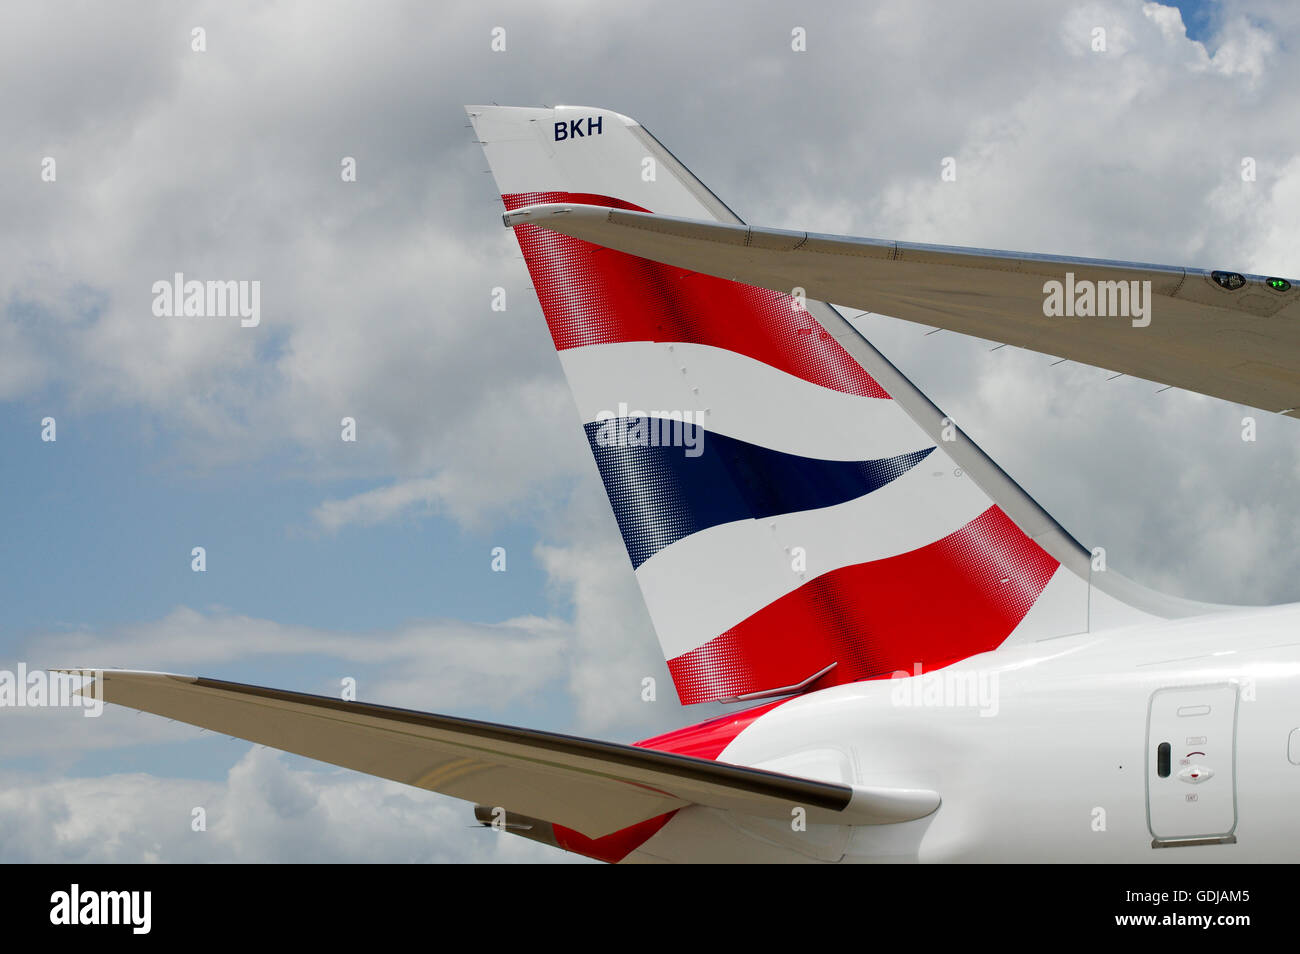 Logo of British Airways on the tail of an aircraft Stock Photo